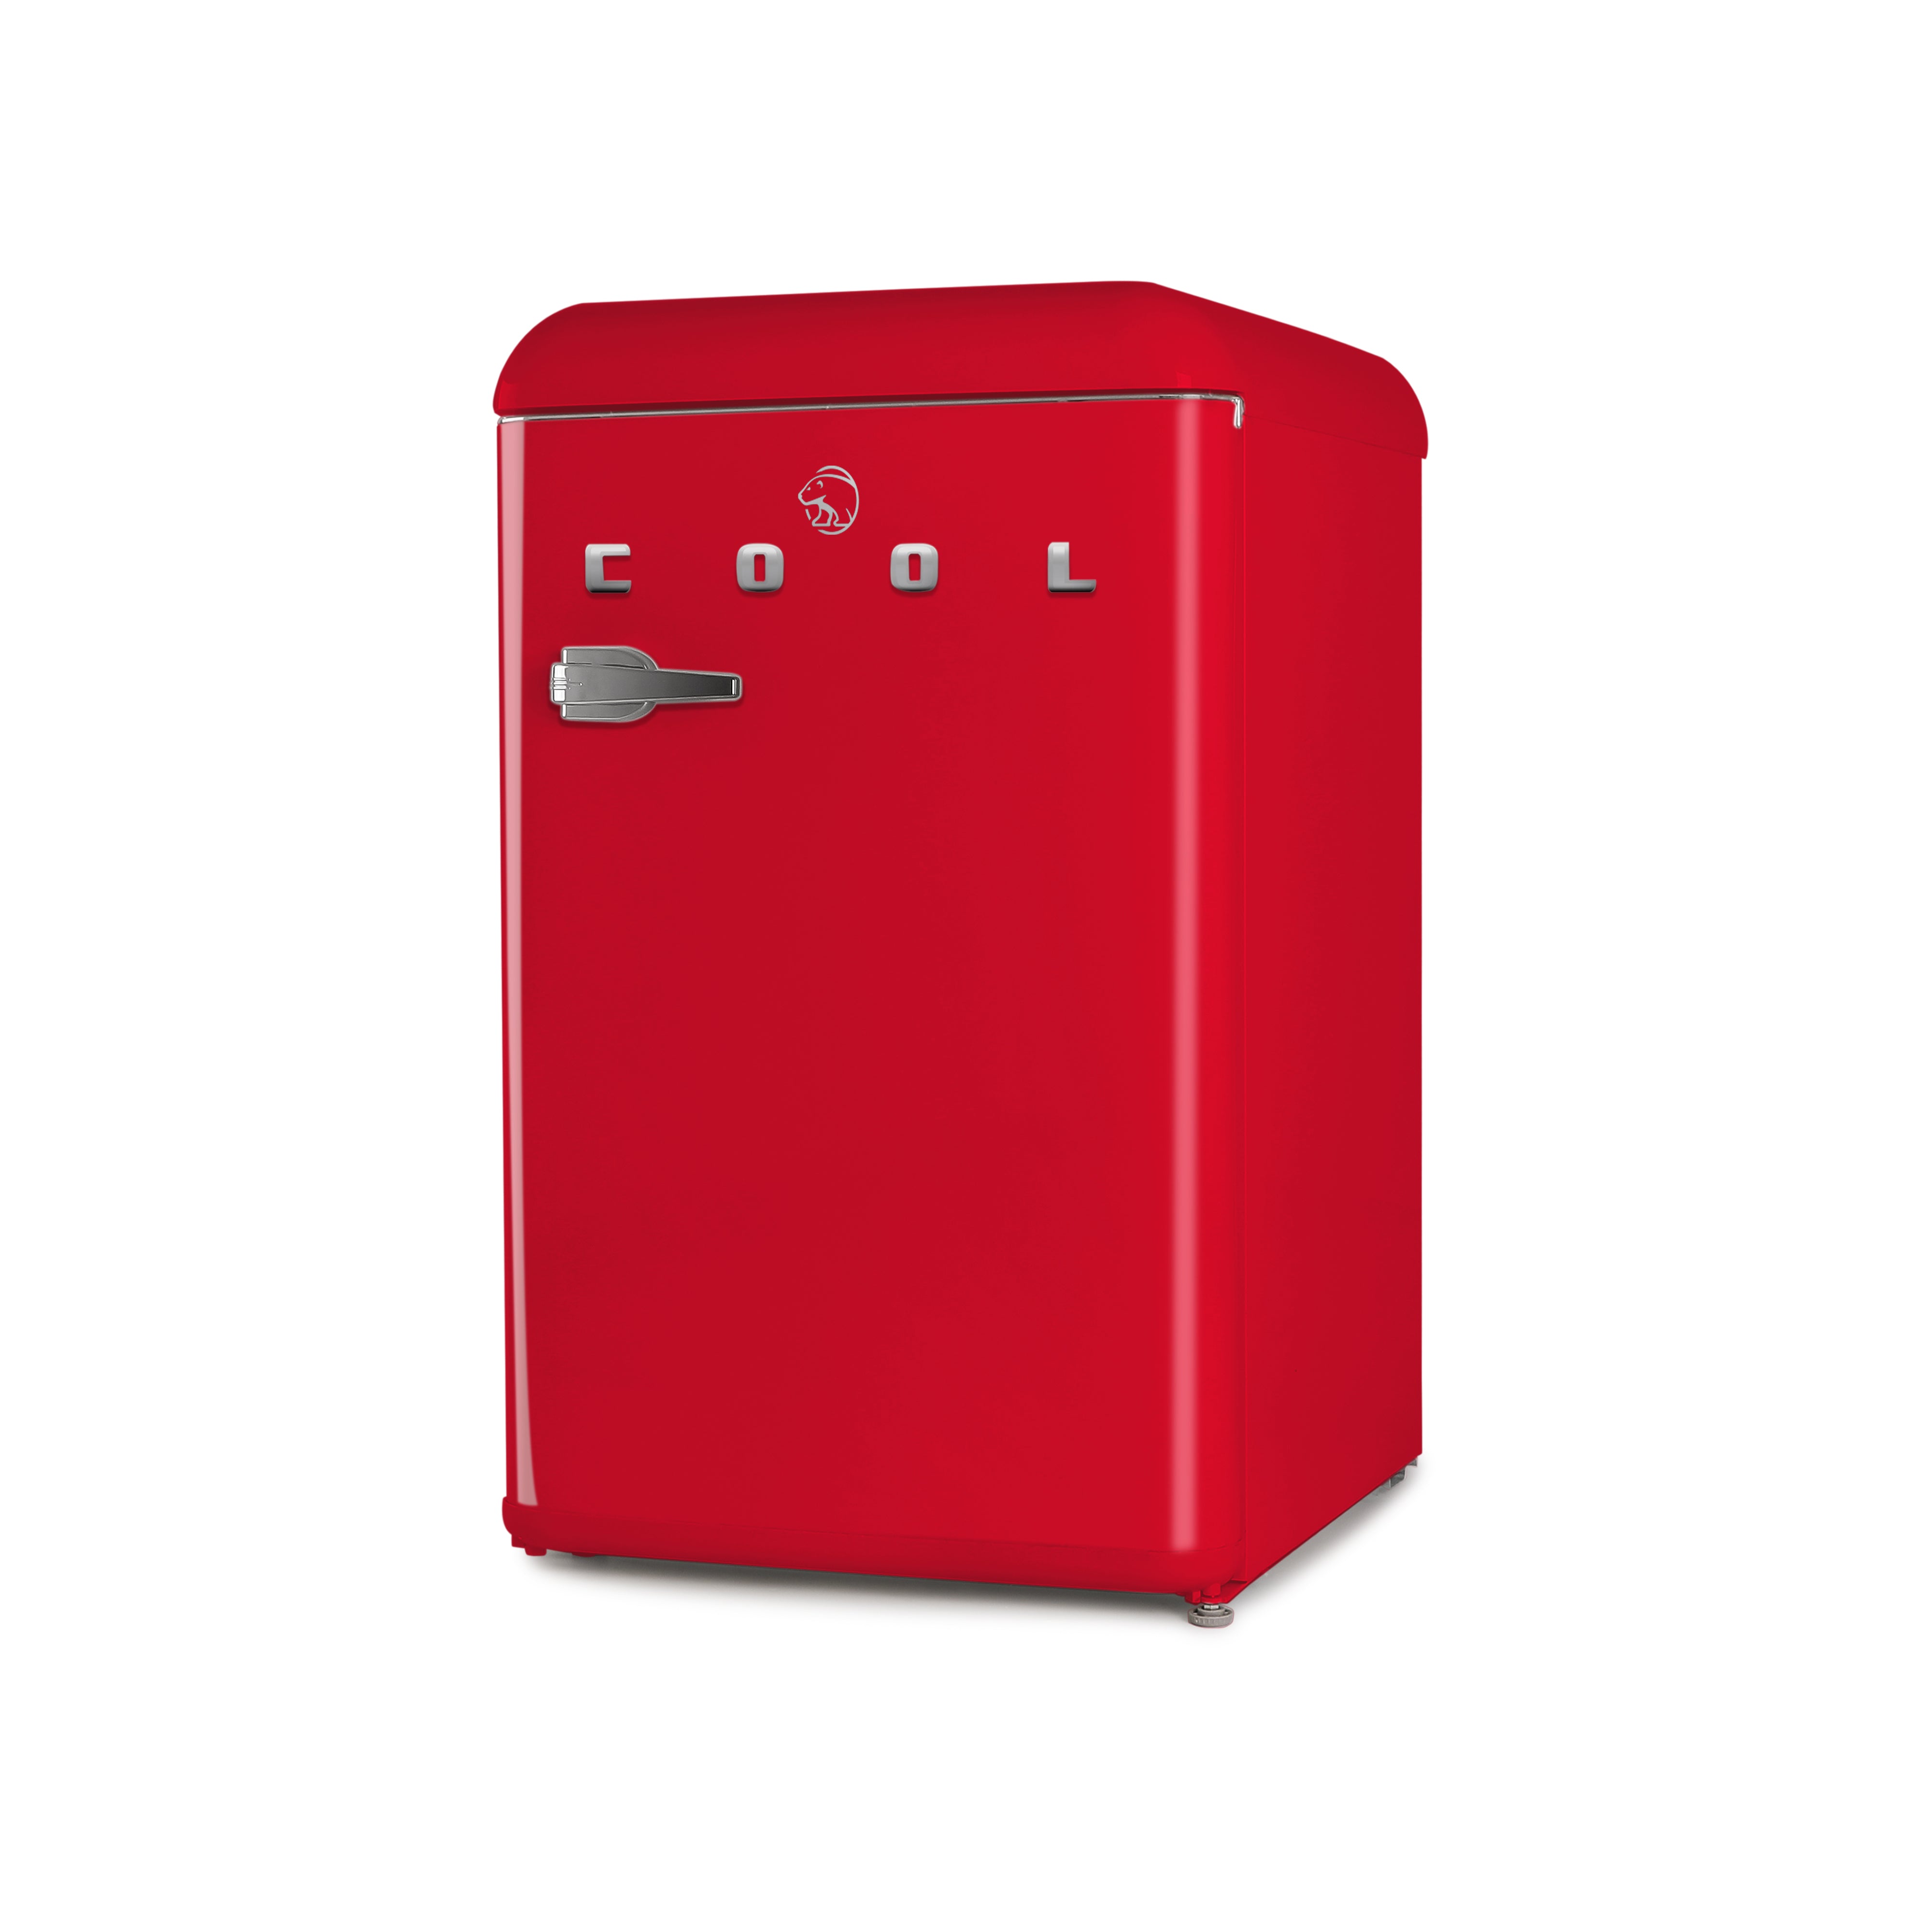 COMMERCIAL COOL Retro Refrigerator 4.0 Cu. Ft., Red